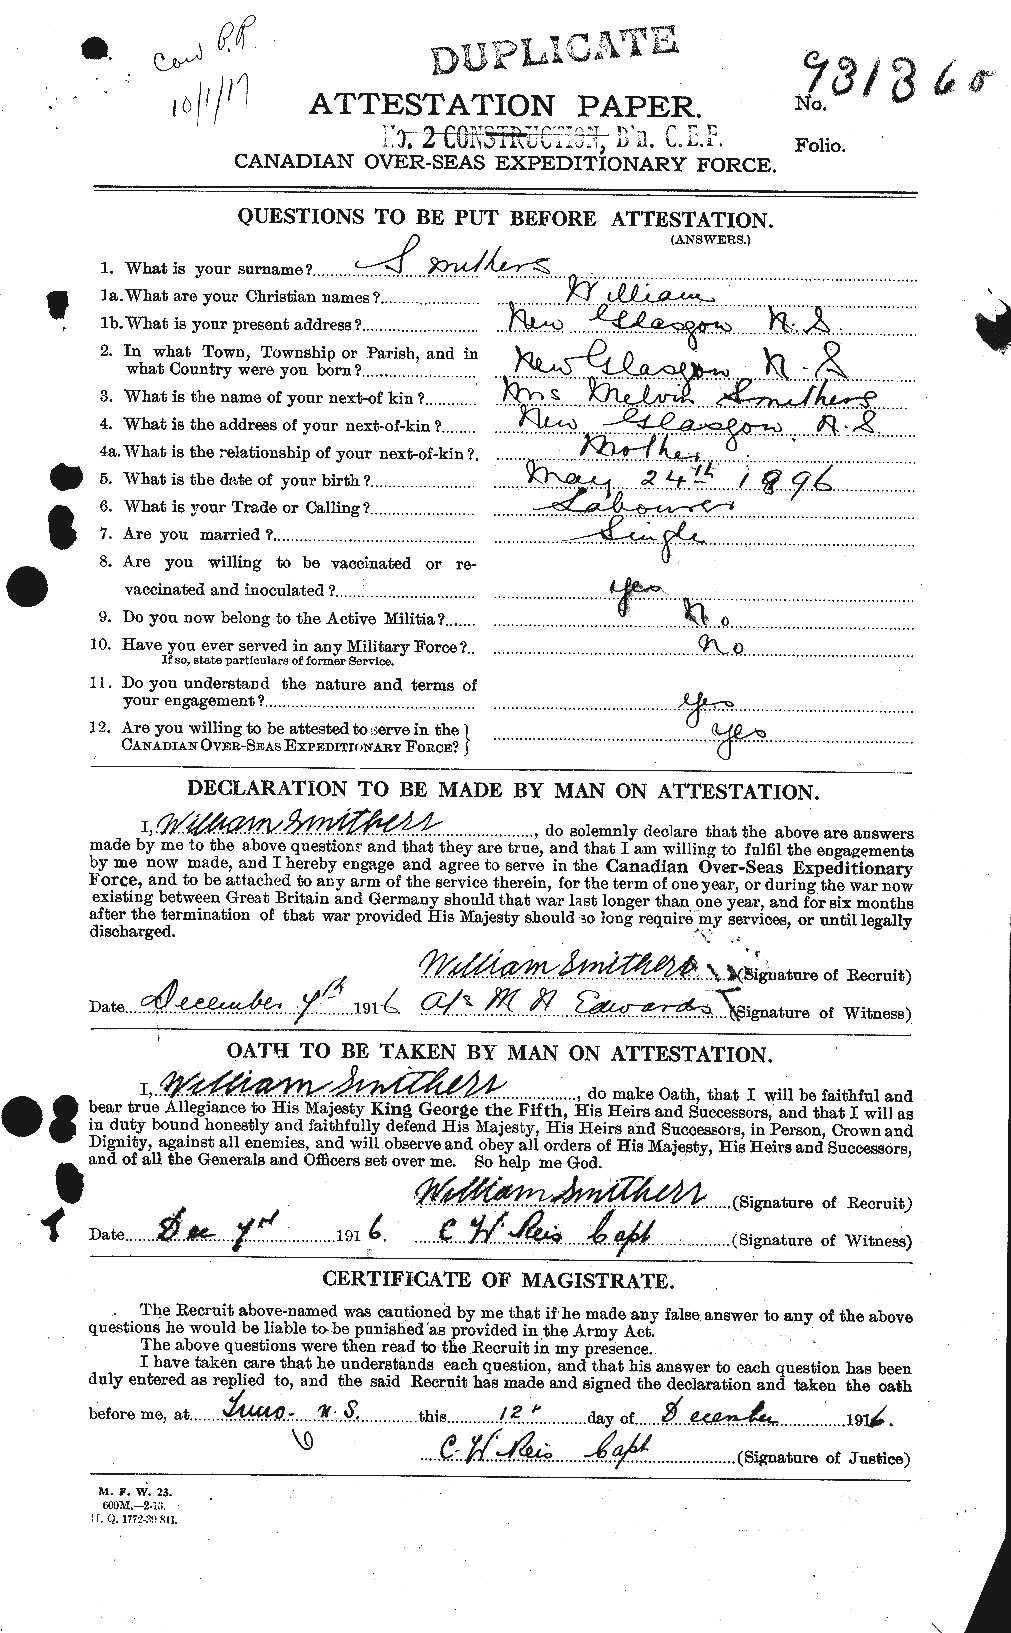 Personnel Records of the First World War - CEF 107218a